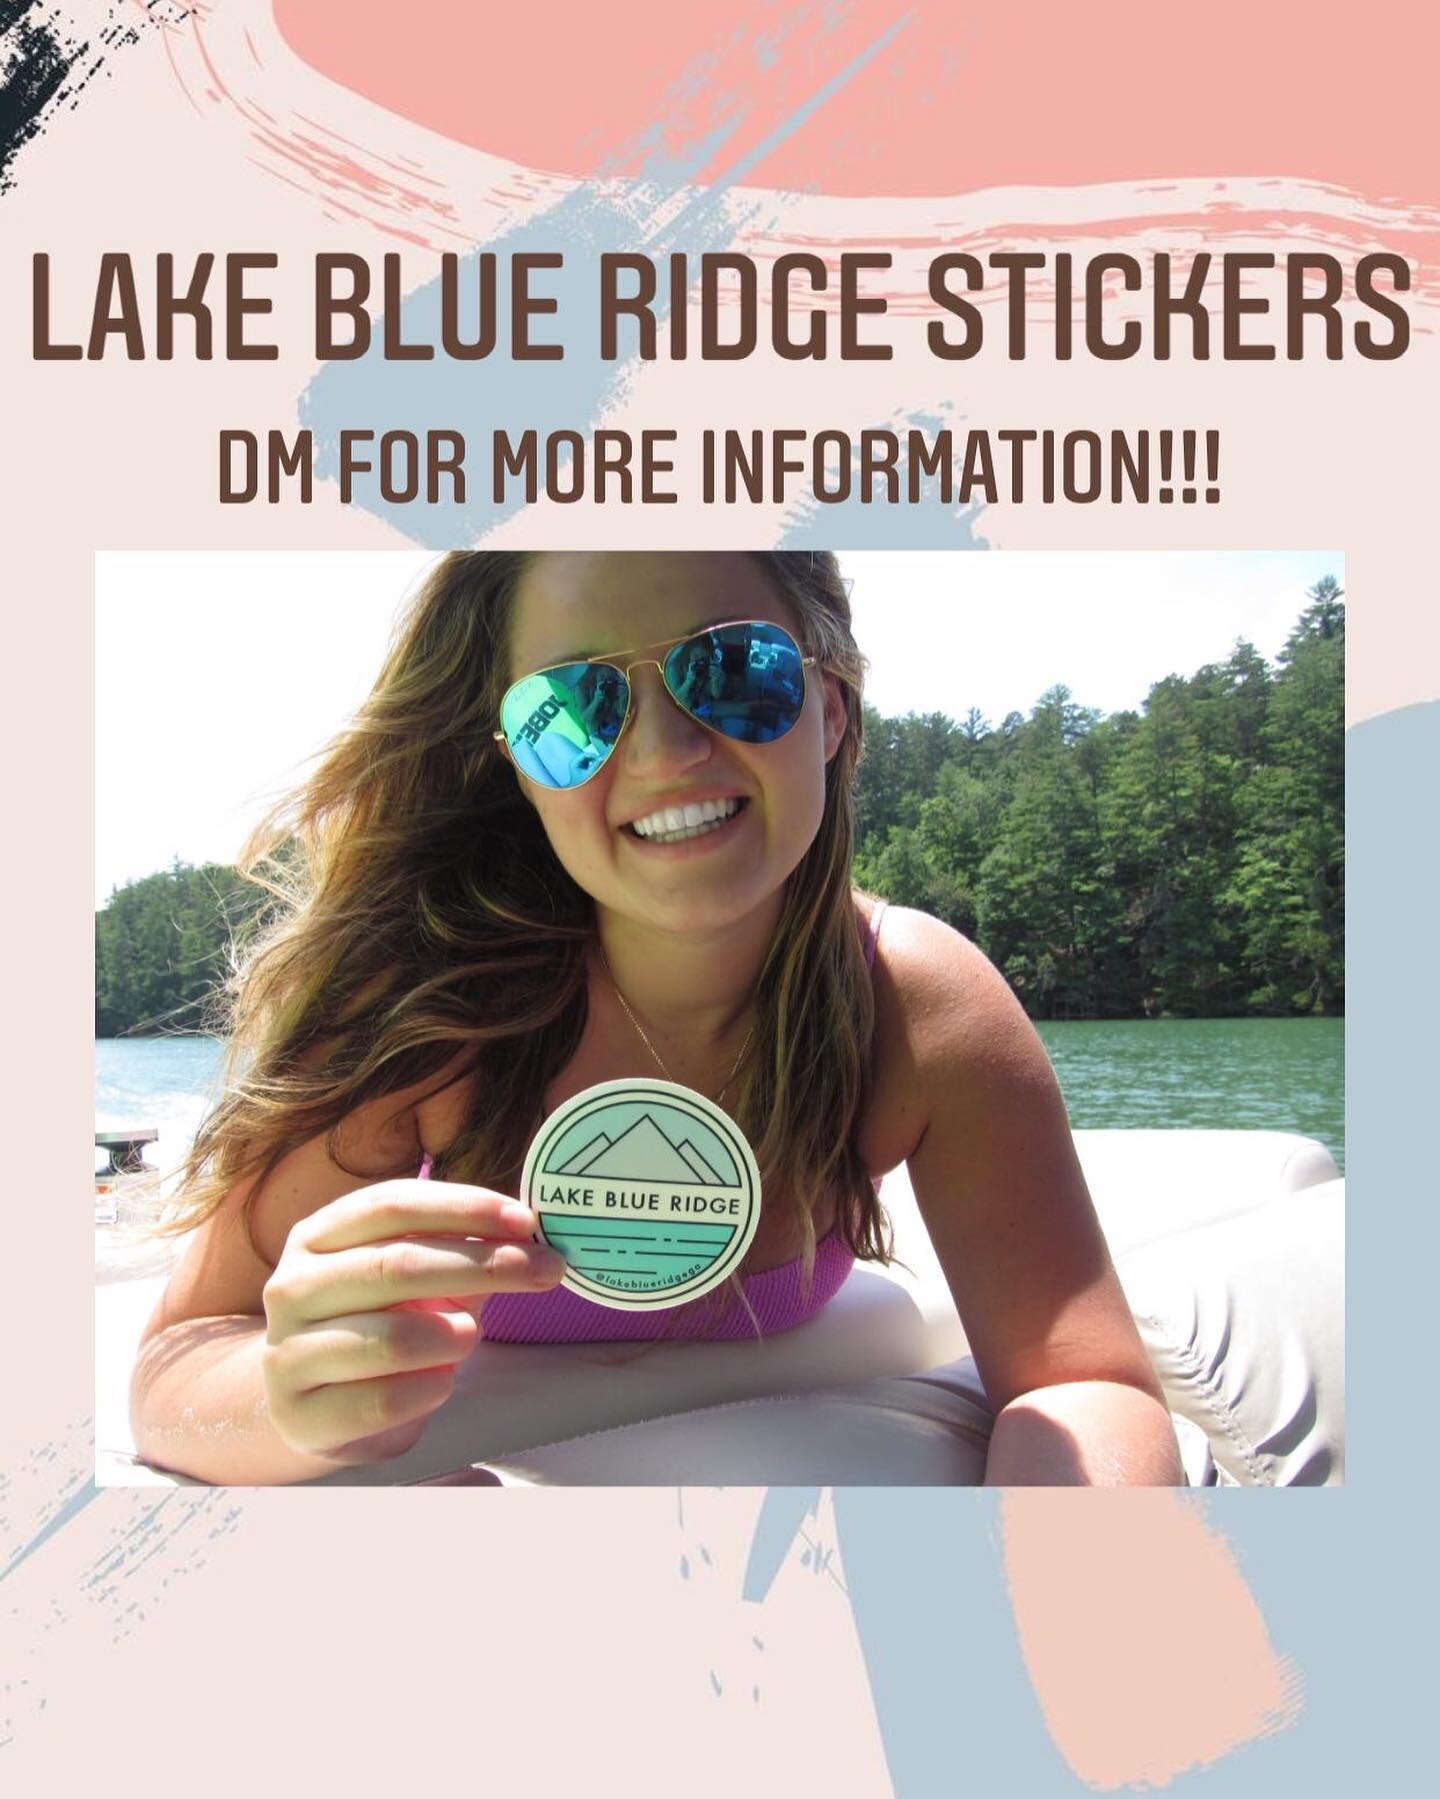 Hey LBR lovers!!!!! Don&rsquo;t forget to stock up on your LBR stickers! As of now, we are only accepting venmo but that will change soon! Each sticker is $3 and includes shipping! Dm for more information!! 😊😊